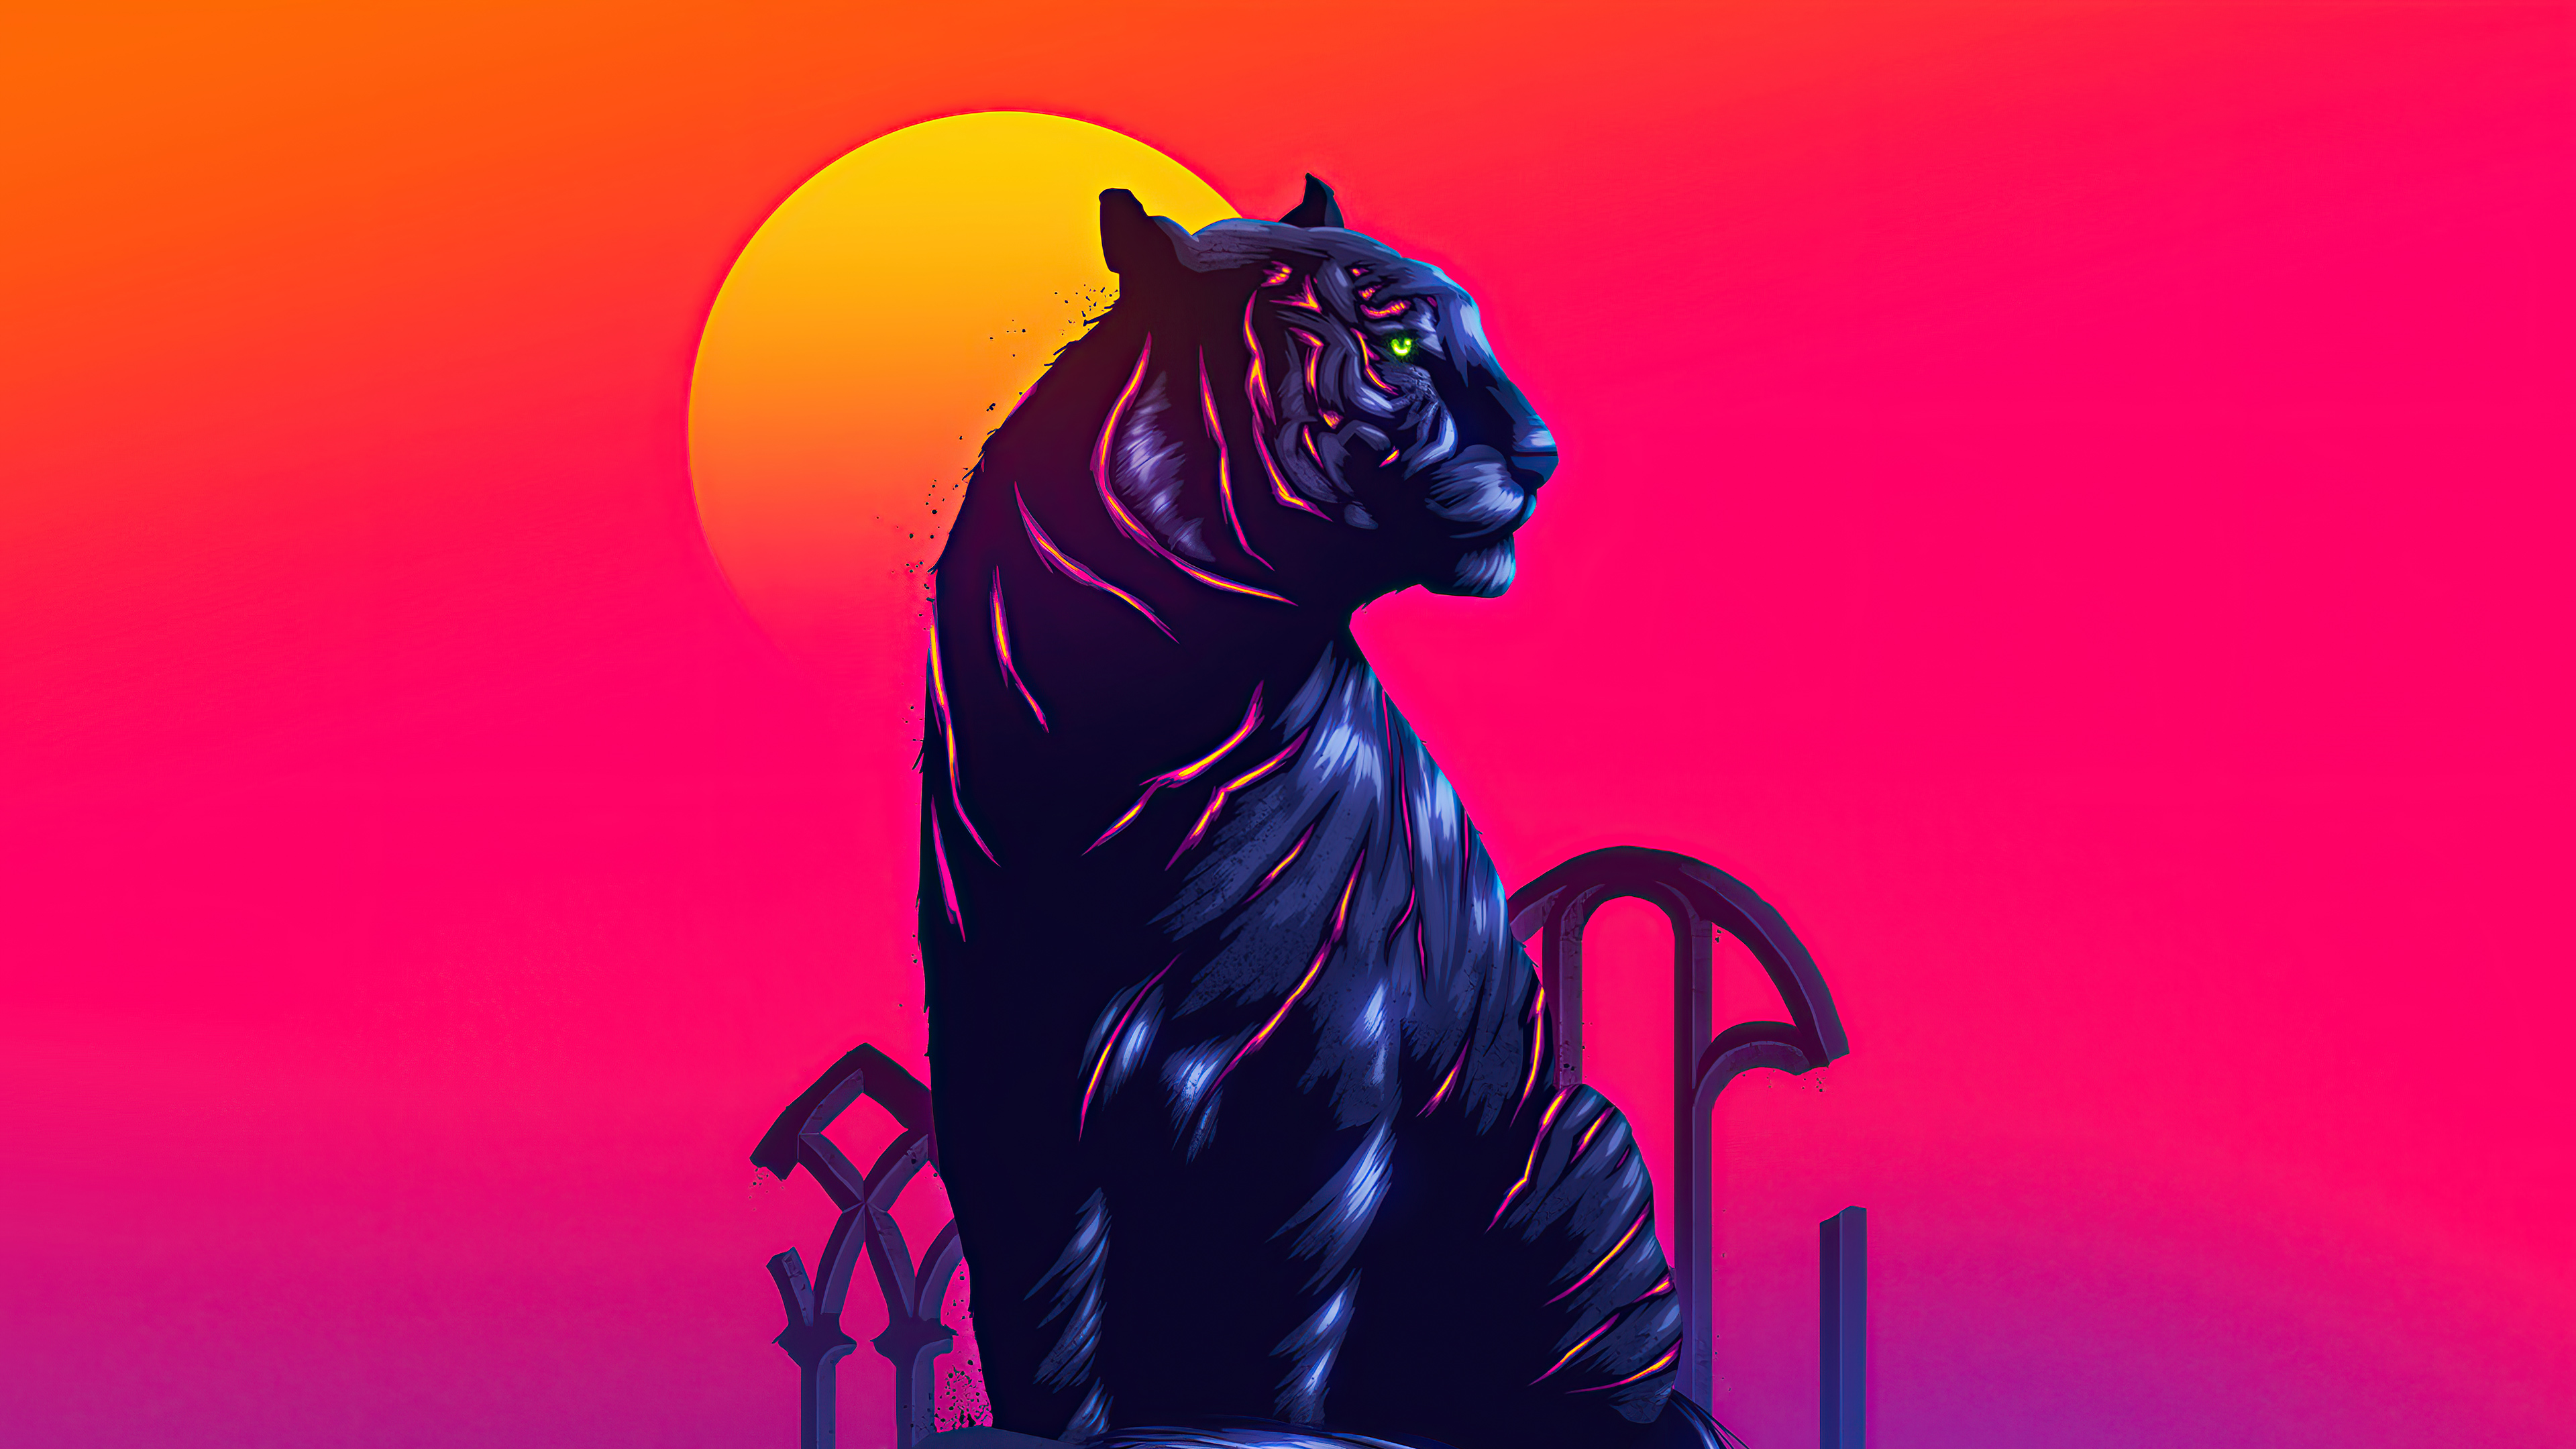 Neon Tiger Wallpapers